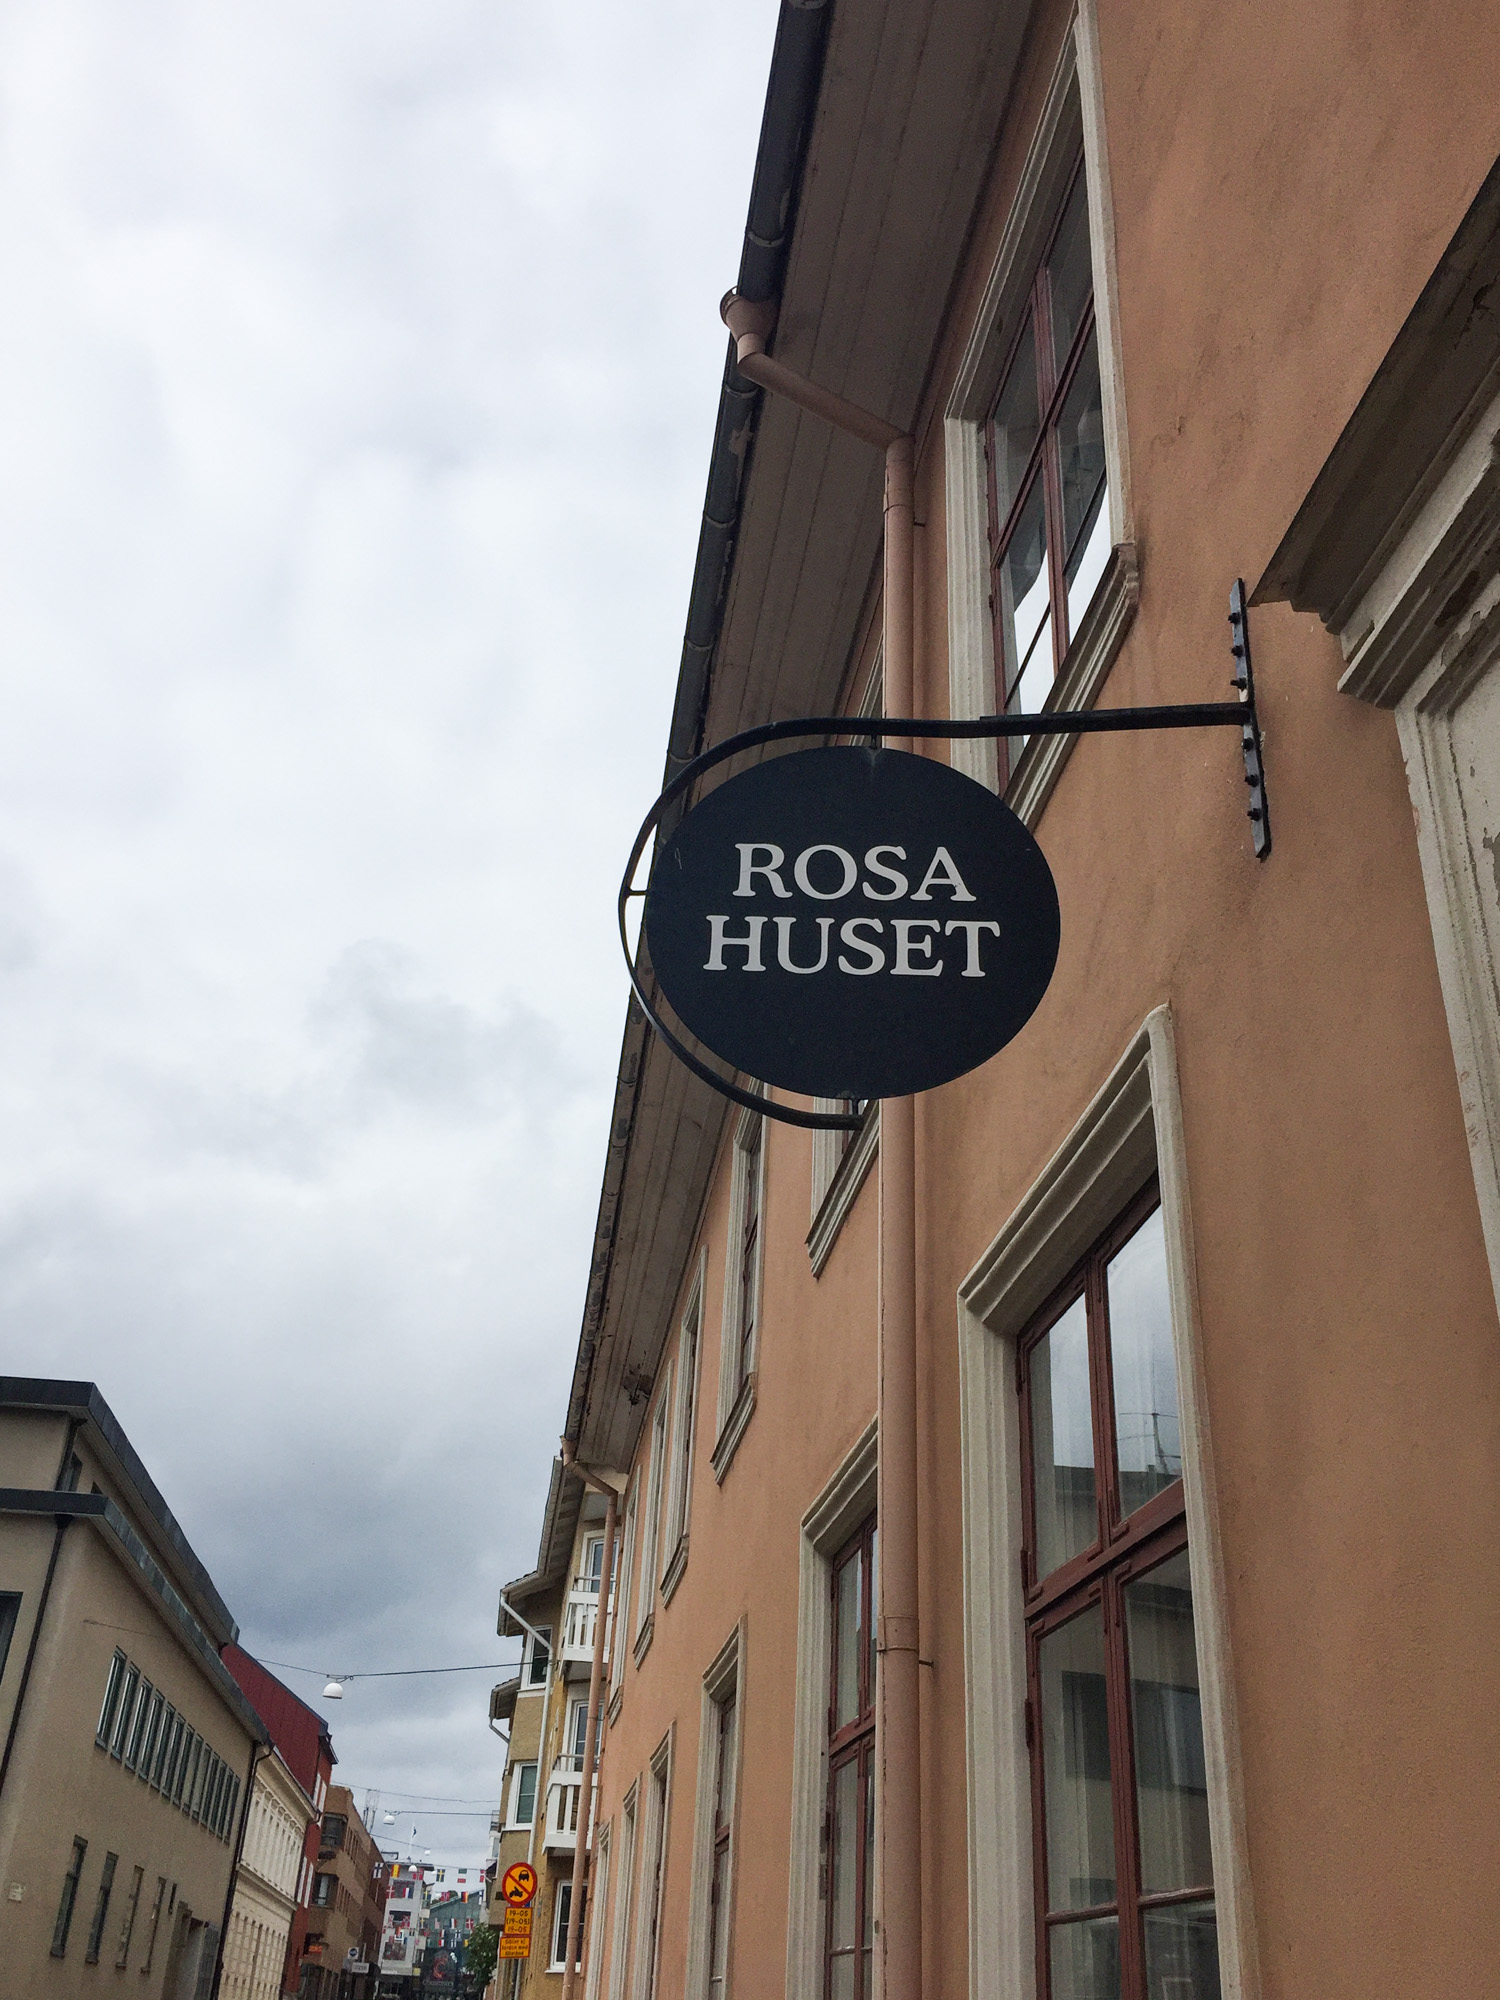 Tiina Petersson exhibition Rosa huset May 2016